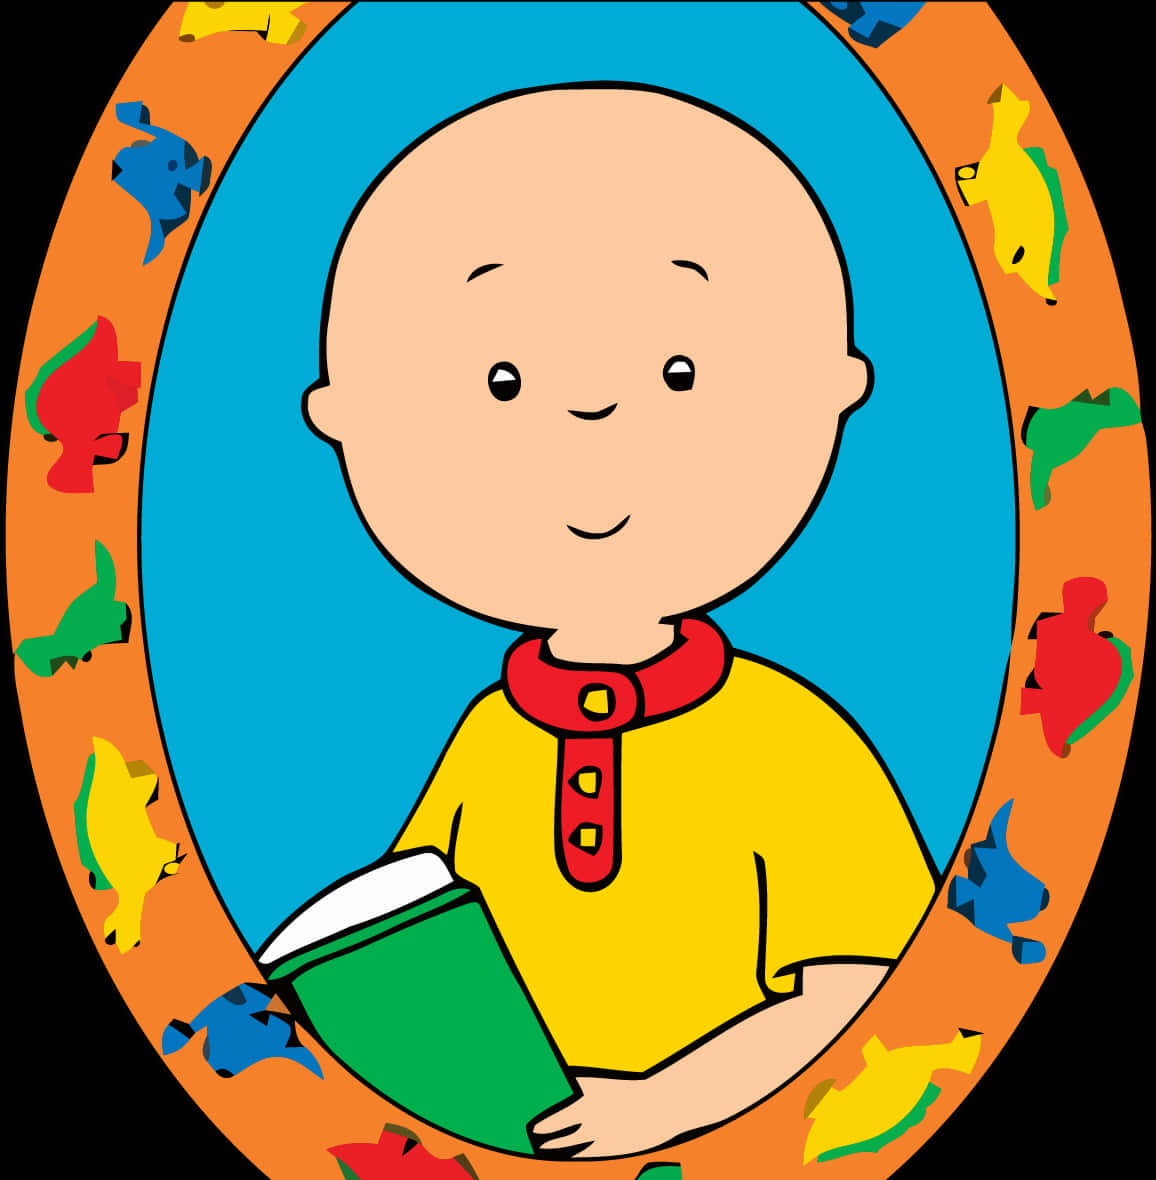 Caillou Cartoon Character Holding Book